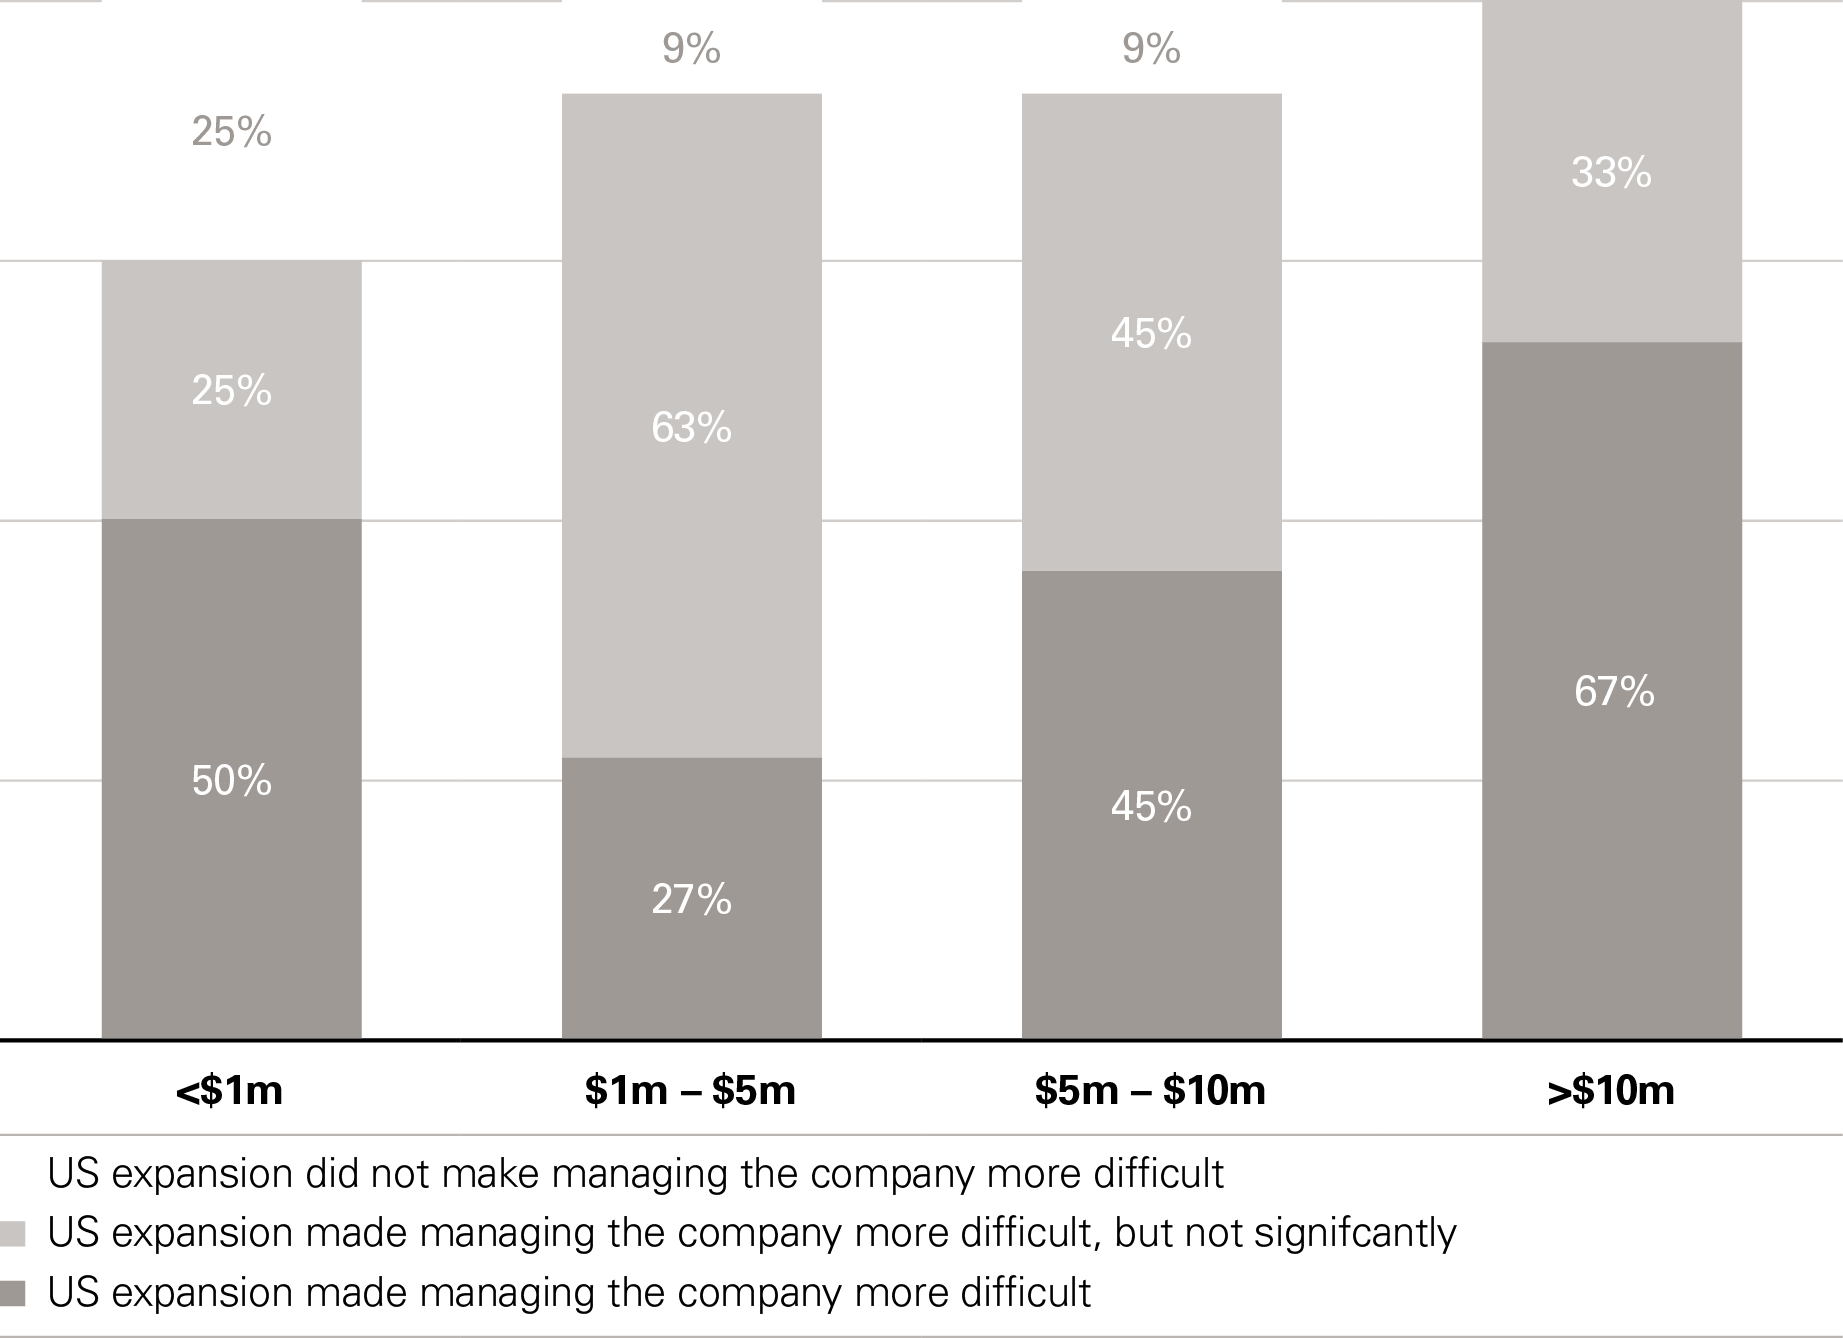 US expansion's impact on difficulty managing the company by funding amount raised prior US expansion